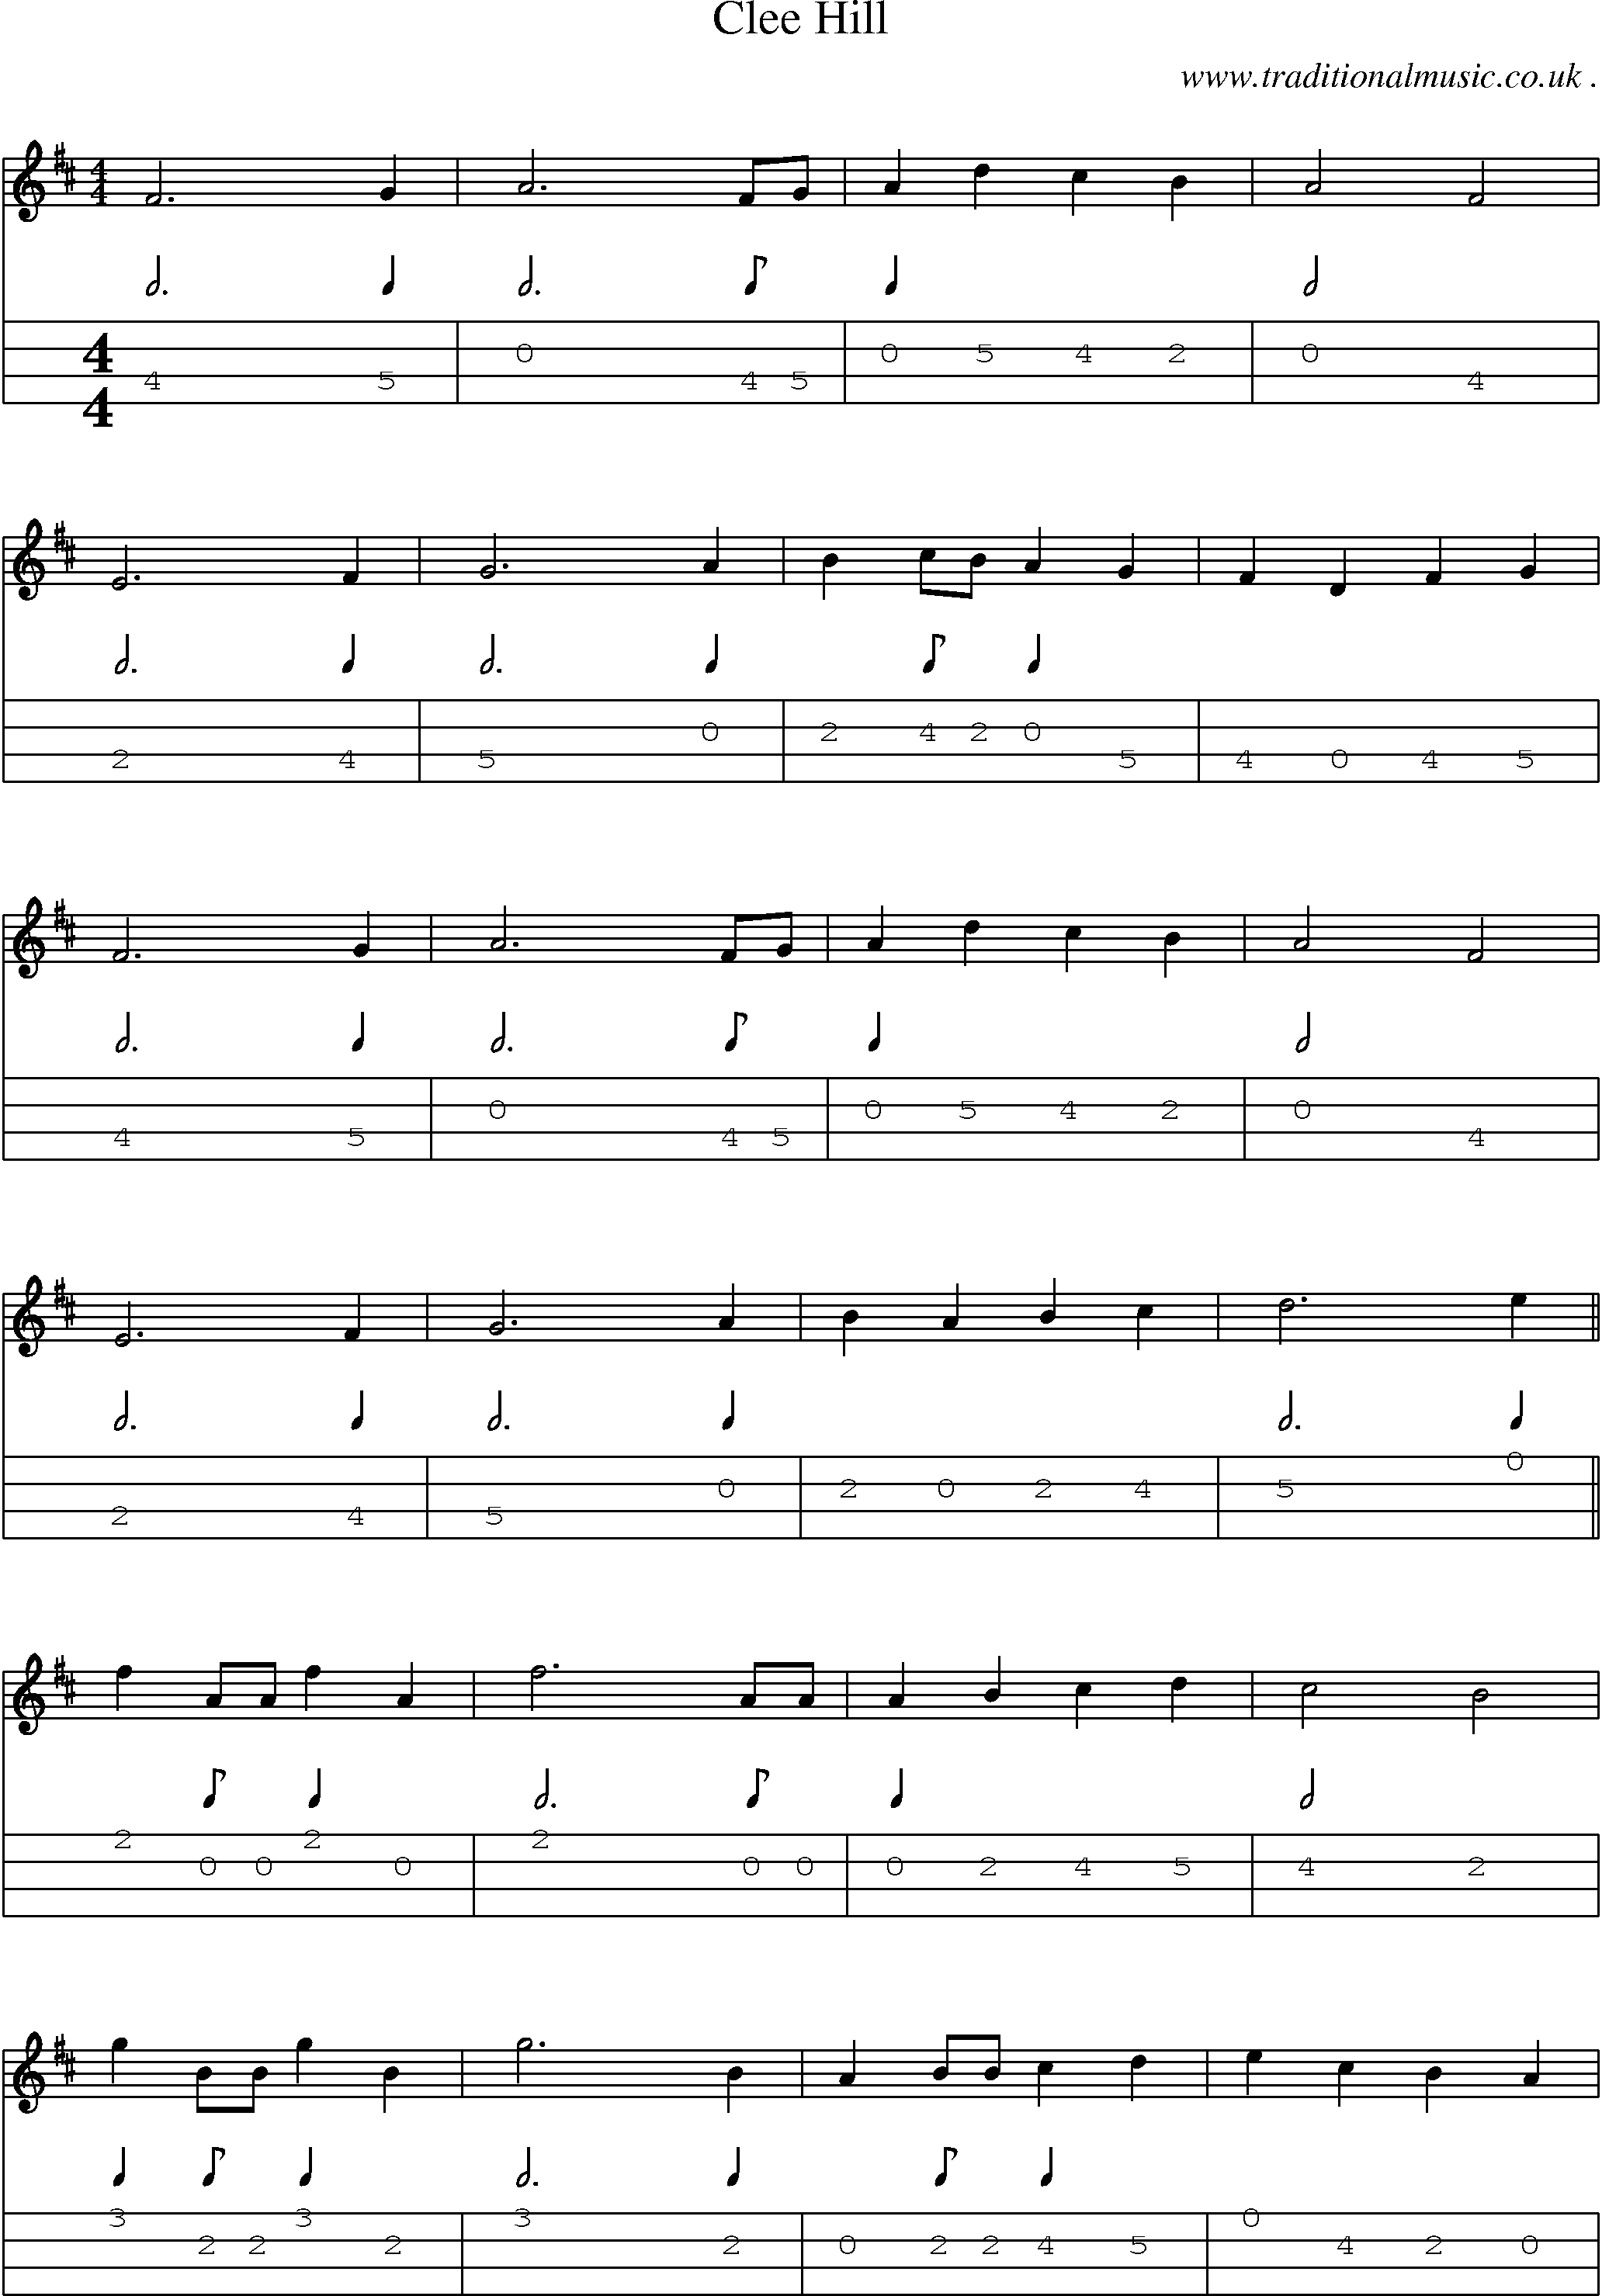 Sheet-Music and Mandolin Tabs for Clee Hill